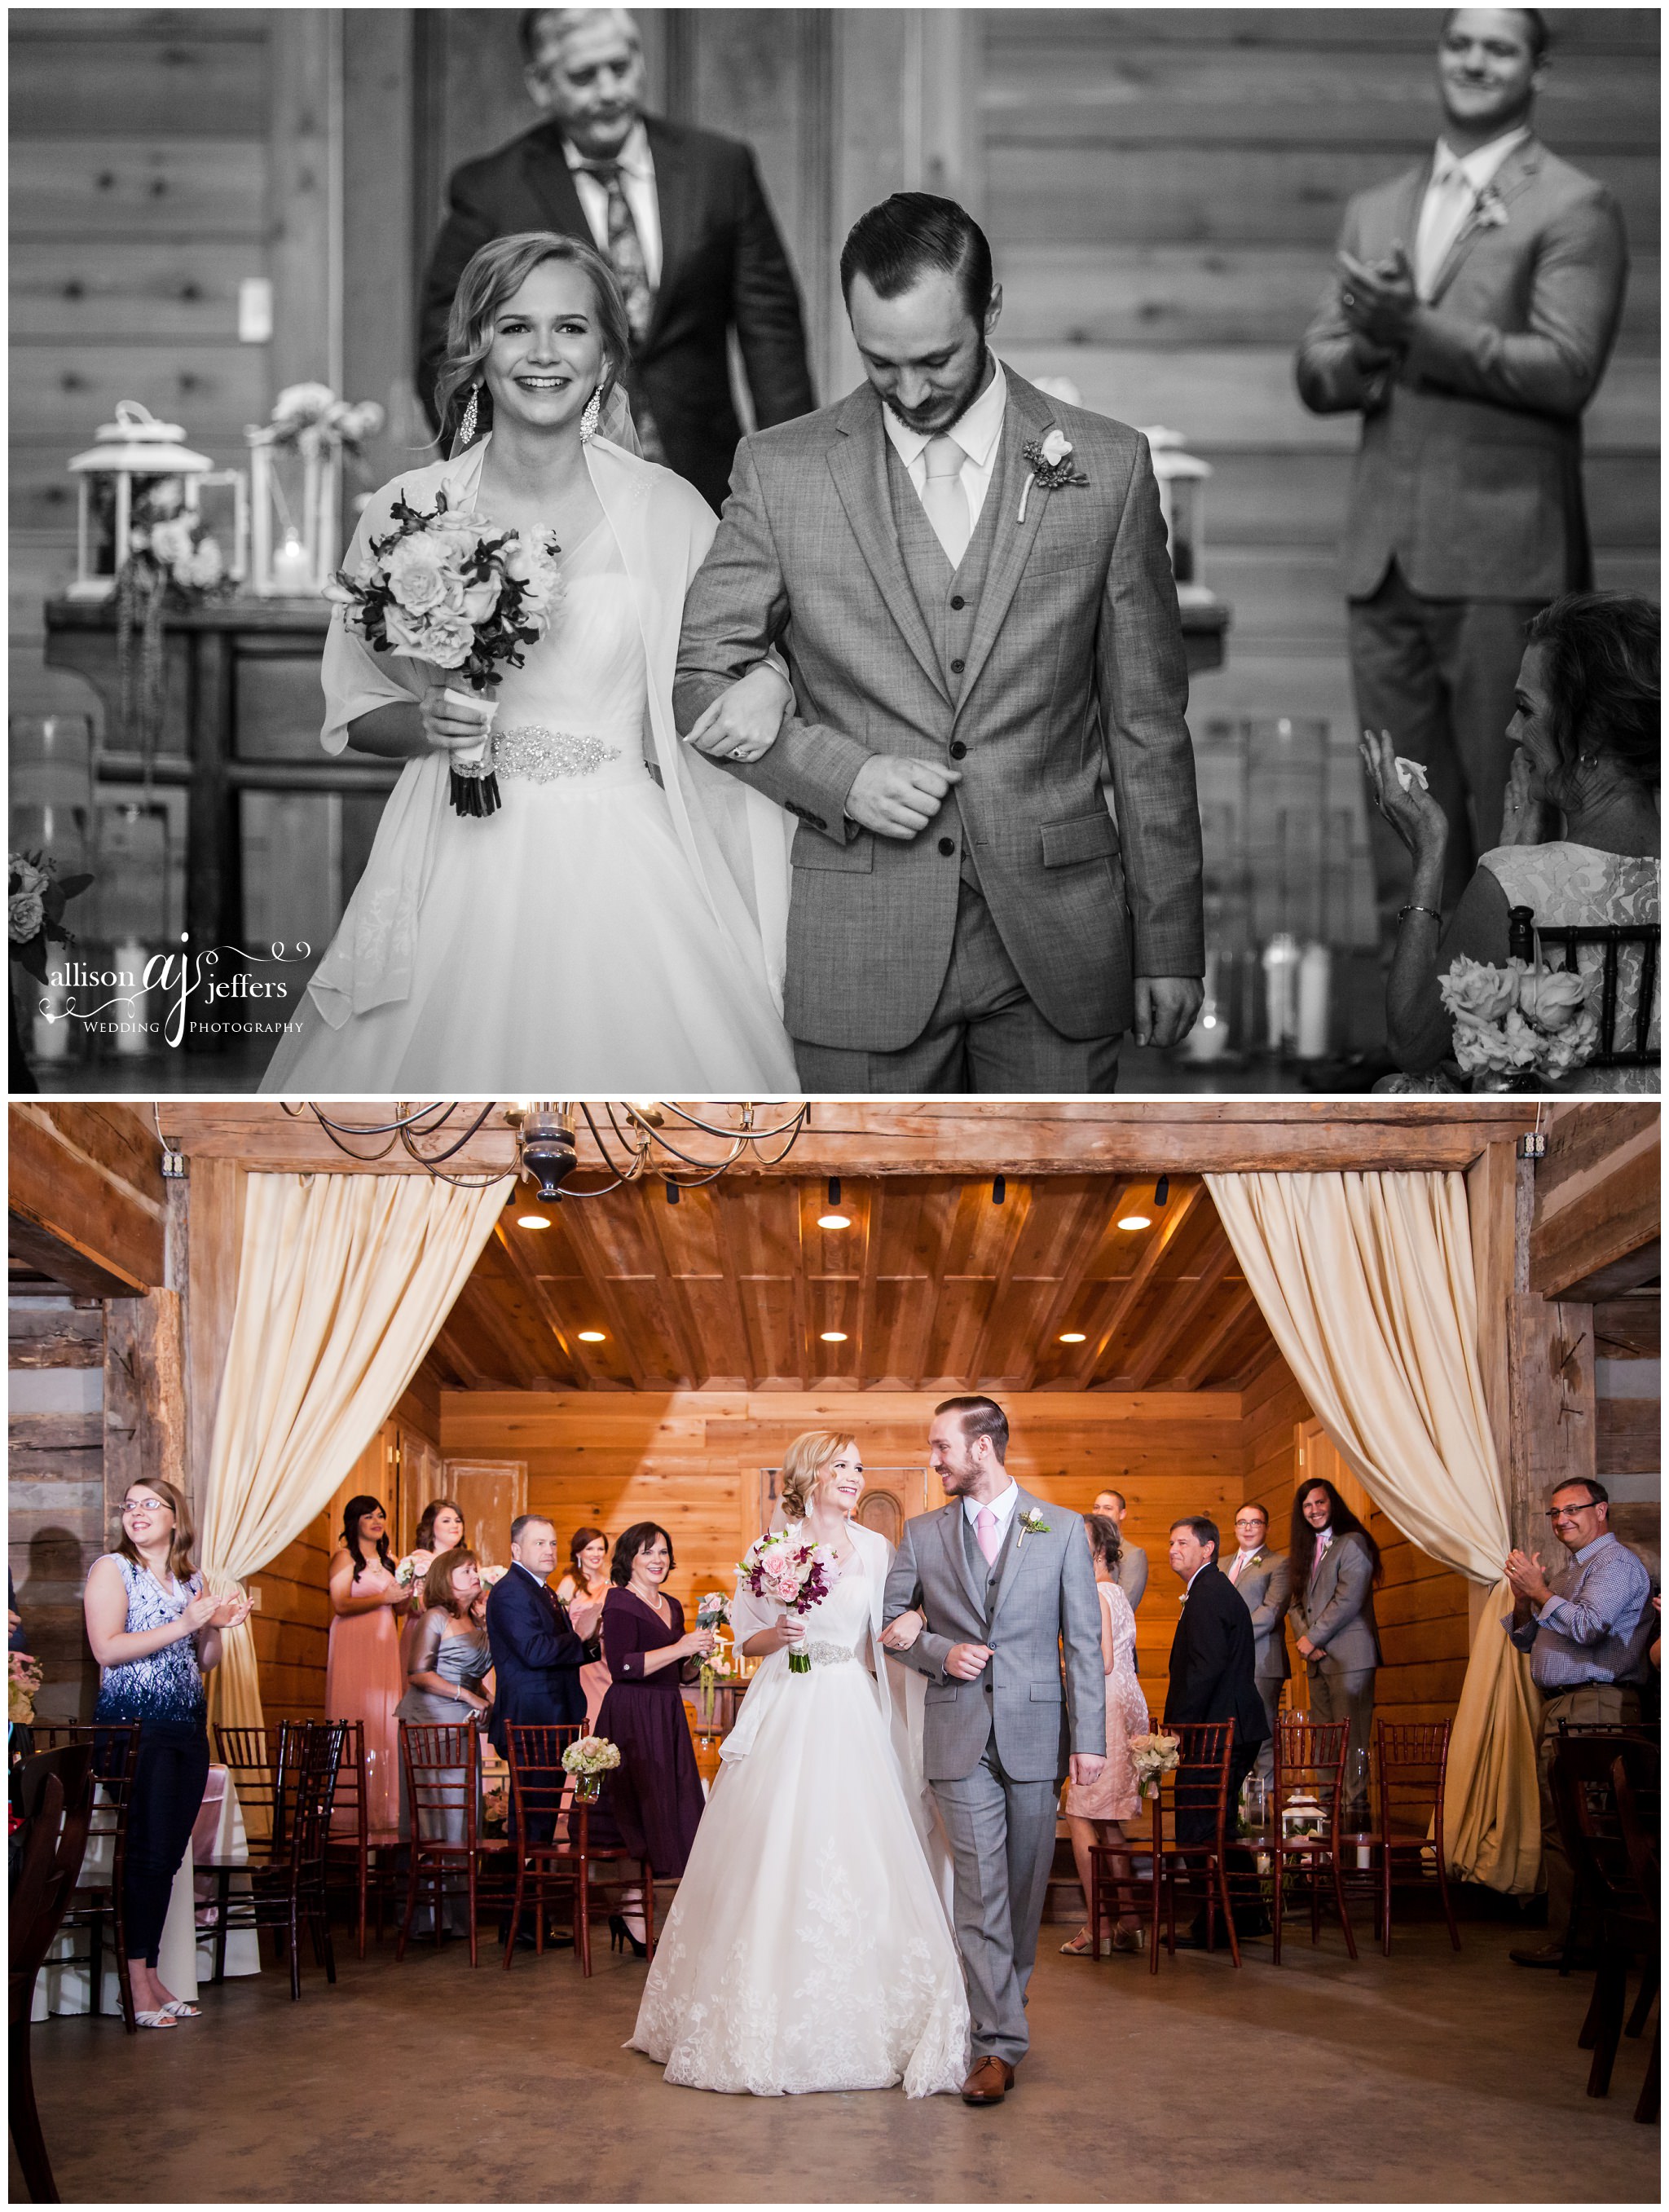 A Blush and Gold Spring Wedding at Hoffman Haus in Fredericksburg Texas by Allison Jeffers Wedding Photography